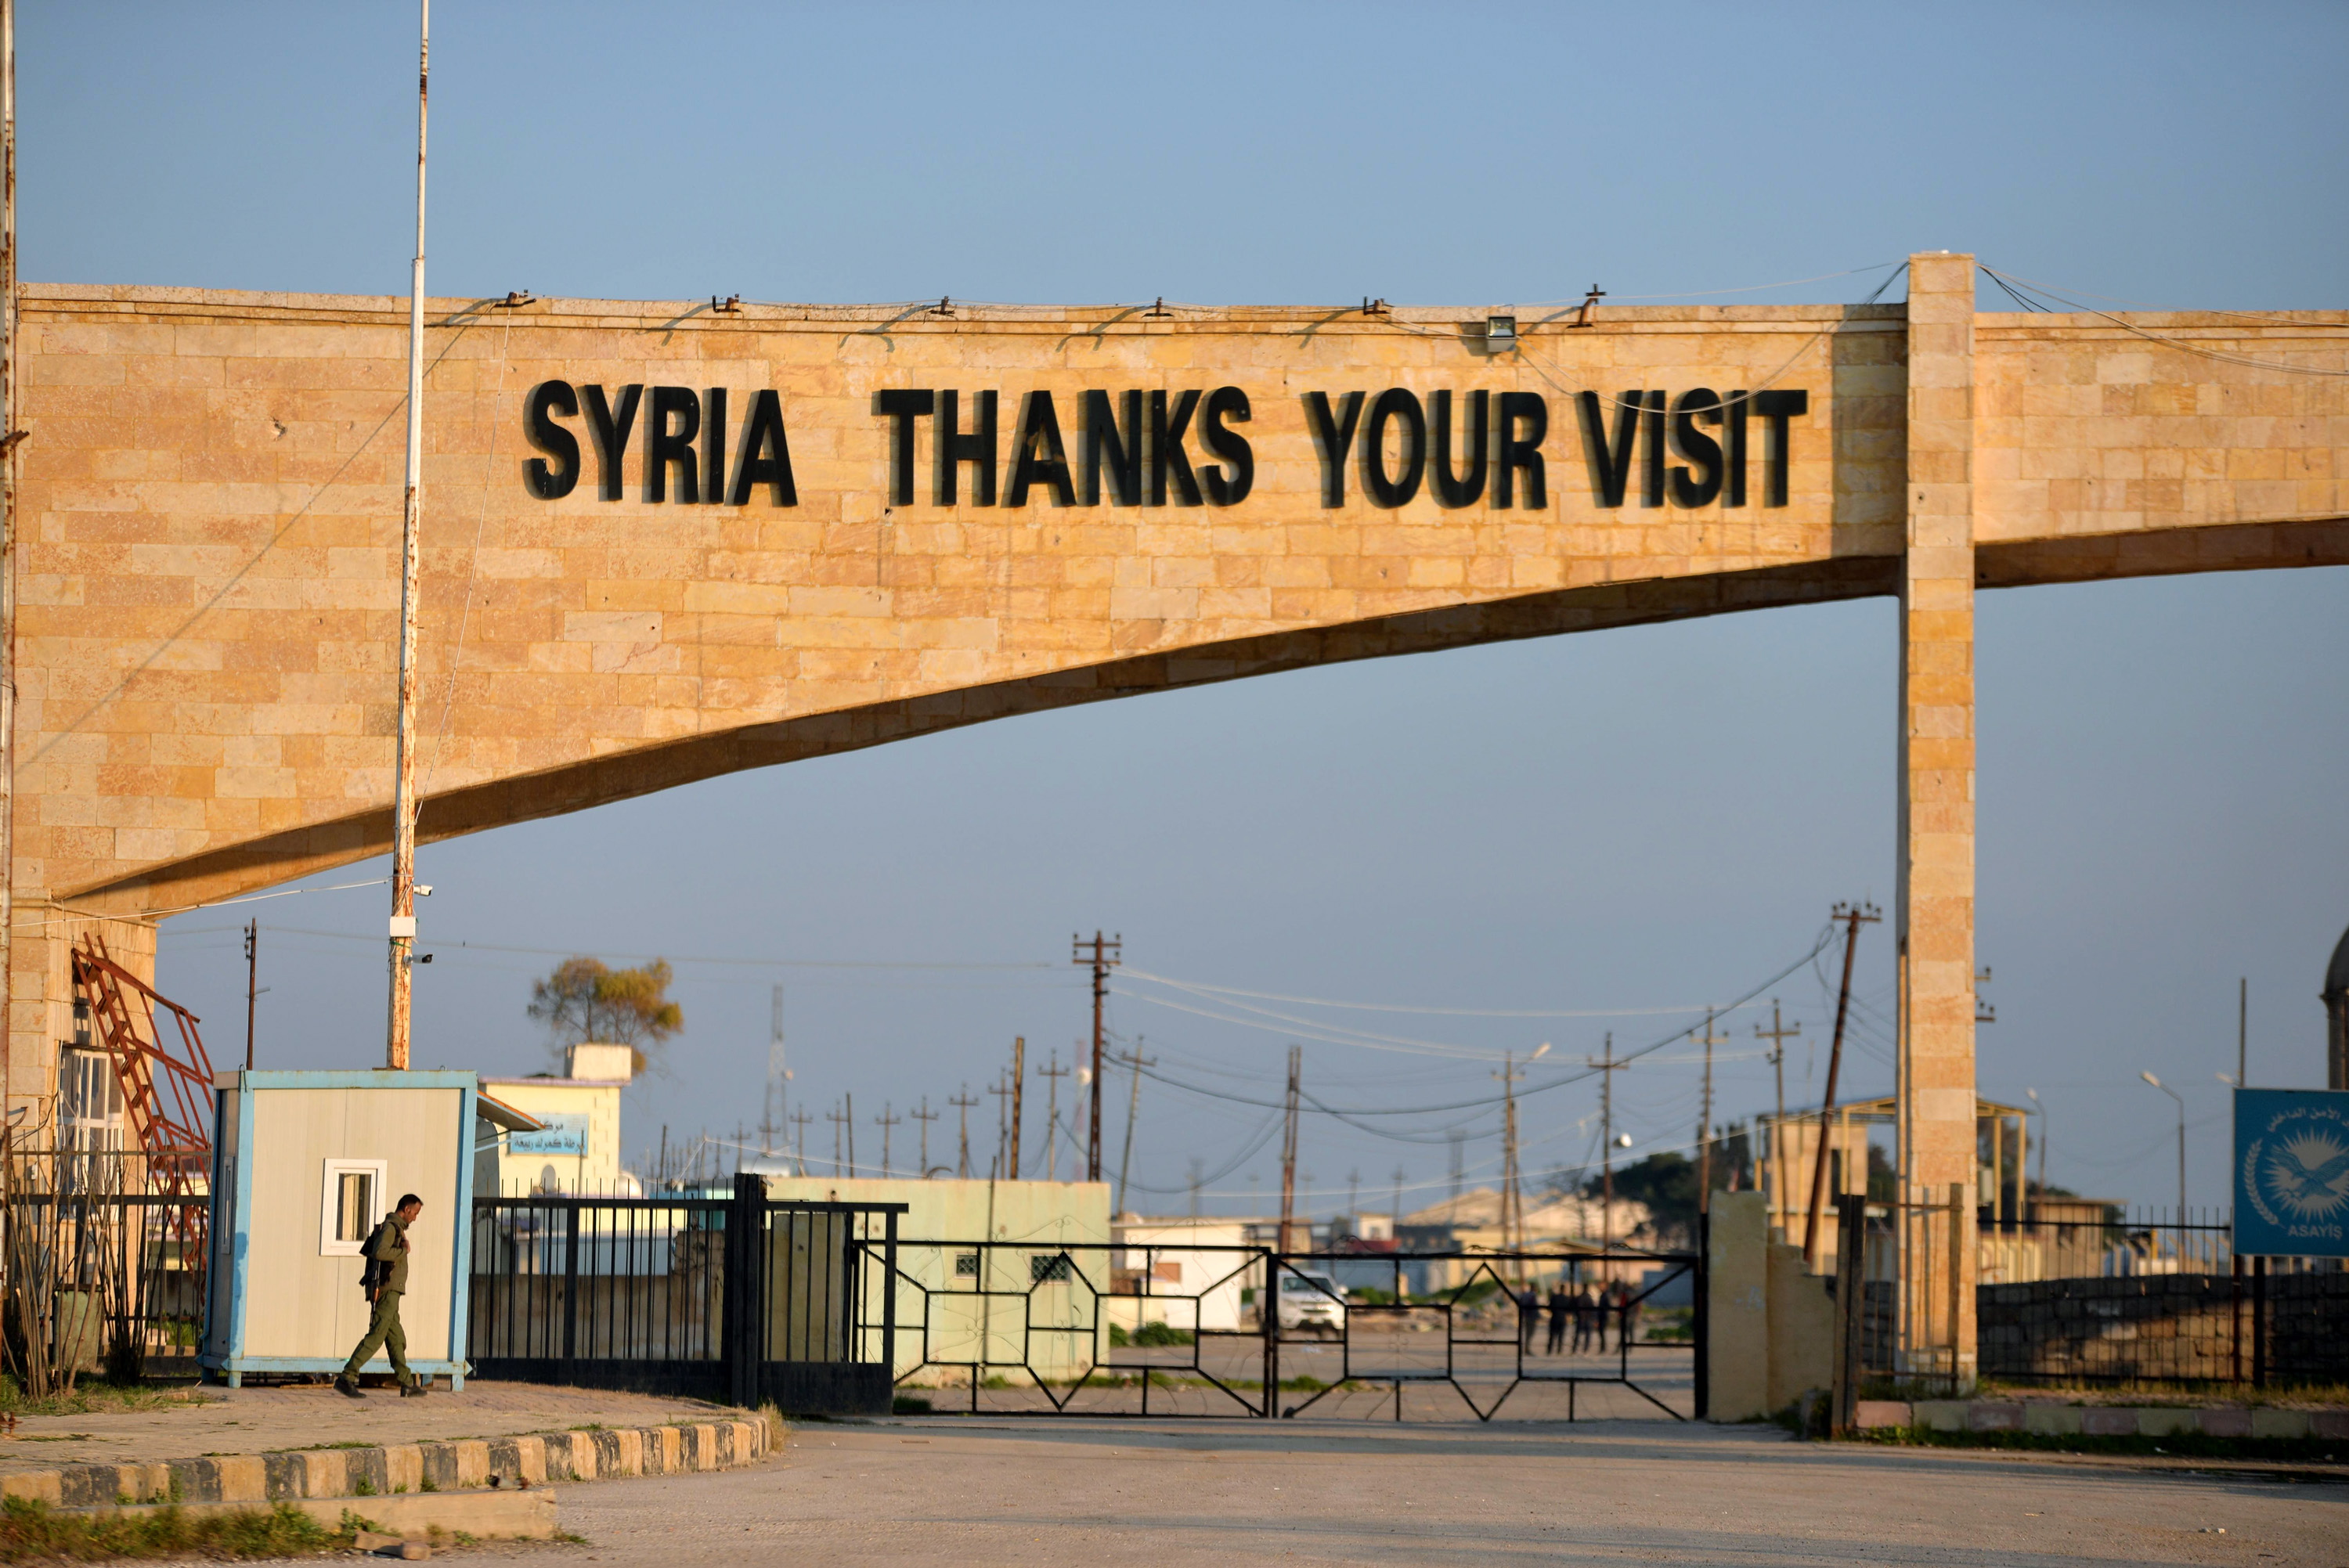 epa07391292 A member of US-backed Syrian Democratic Forces (SDF), stands guard at Ya'arubiya border crossing with Iraq in northeastern Hasakah province, northern Syria on 23 February 2019. Ya'arubiya crossing is the only one of three crossings on the Iraqi borders, which also known as Rabia'a on the Iraqi side. In 2014, the Islamic State (IS) group seized control over the crossing when swept large parts of Syria and Iraq lands, and declaring a so-called 'caliphate' in areas it controlled, before US-backed Iraqi forces drove them out from west of Iraqi in 2016, and defeated them in all of Iraq in late 2017.  EPA/MURTAJA LATEEF